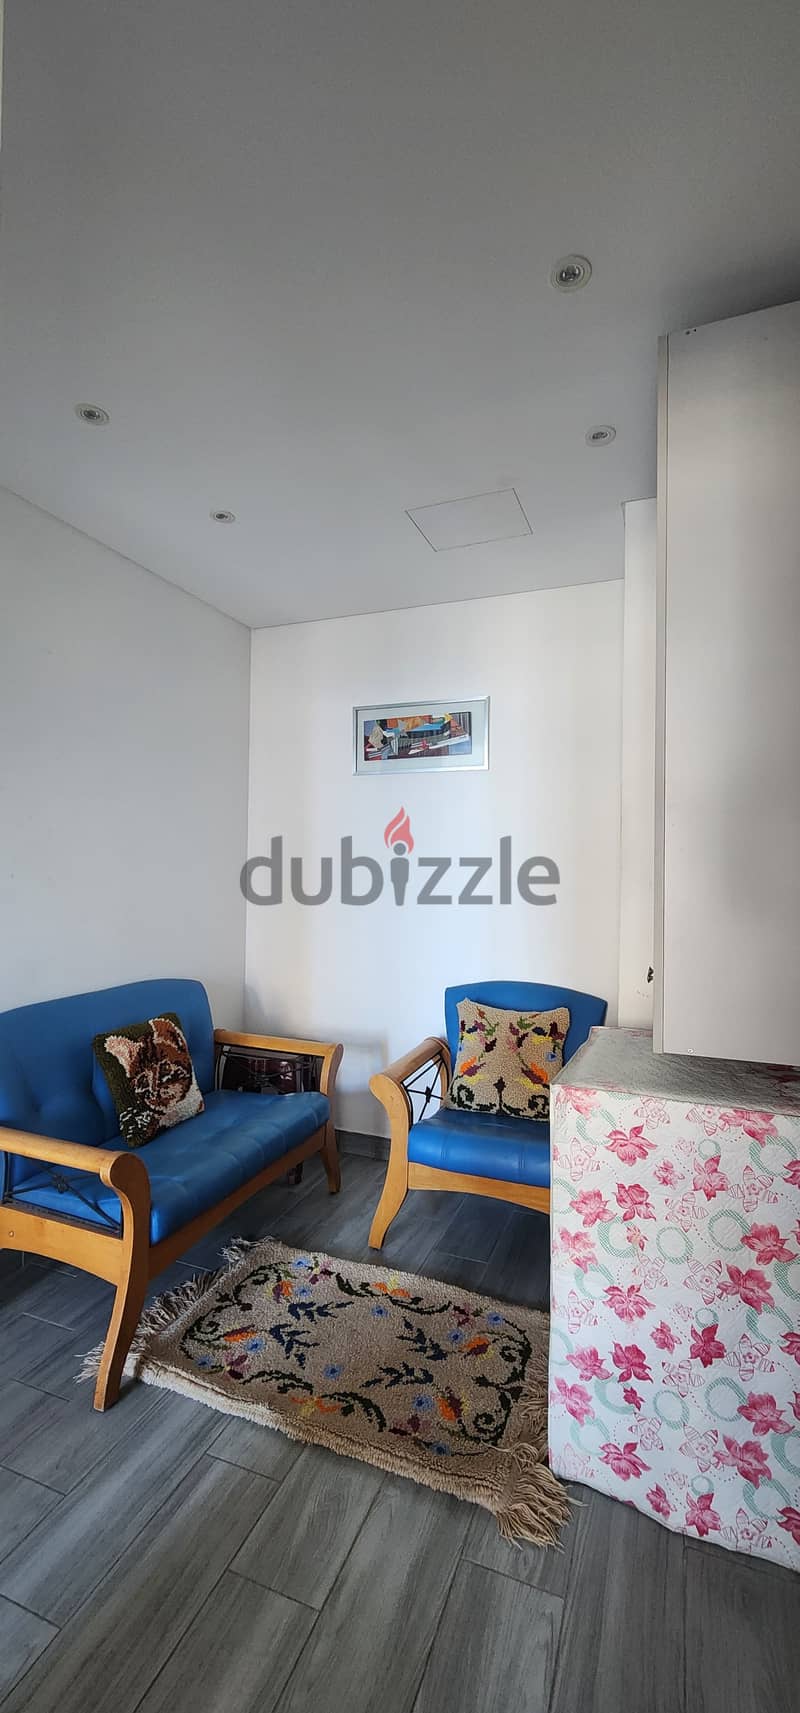 JBEIL PRIME (120SQ) FULLY FURNISHED WITH TERRACE , (JBR-172) 3